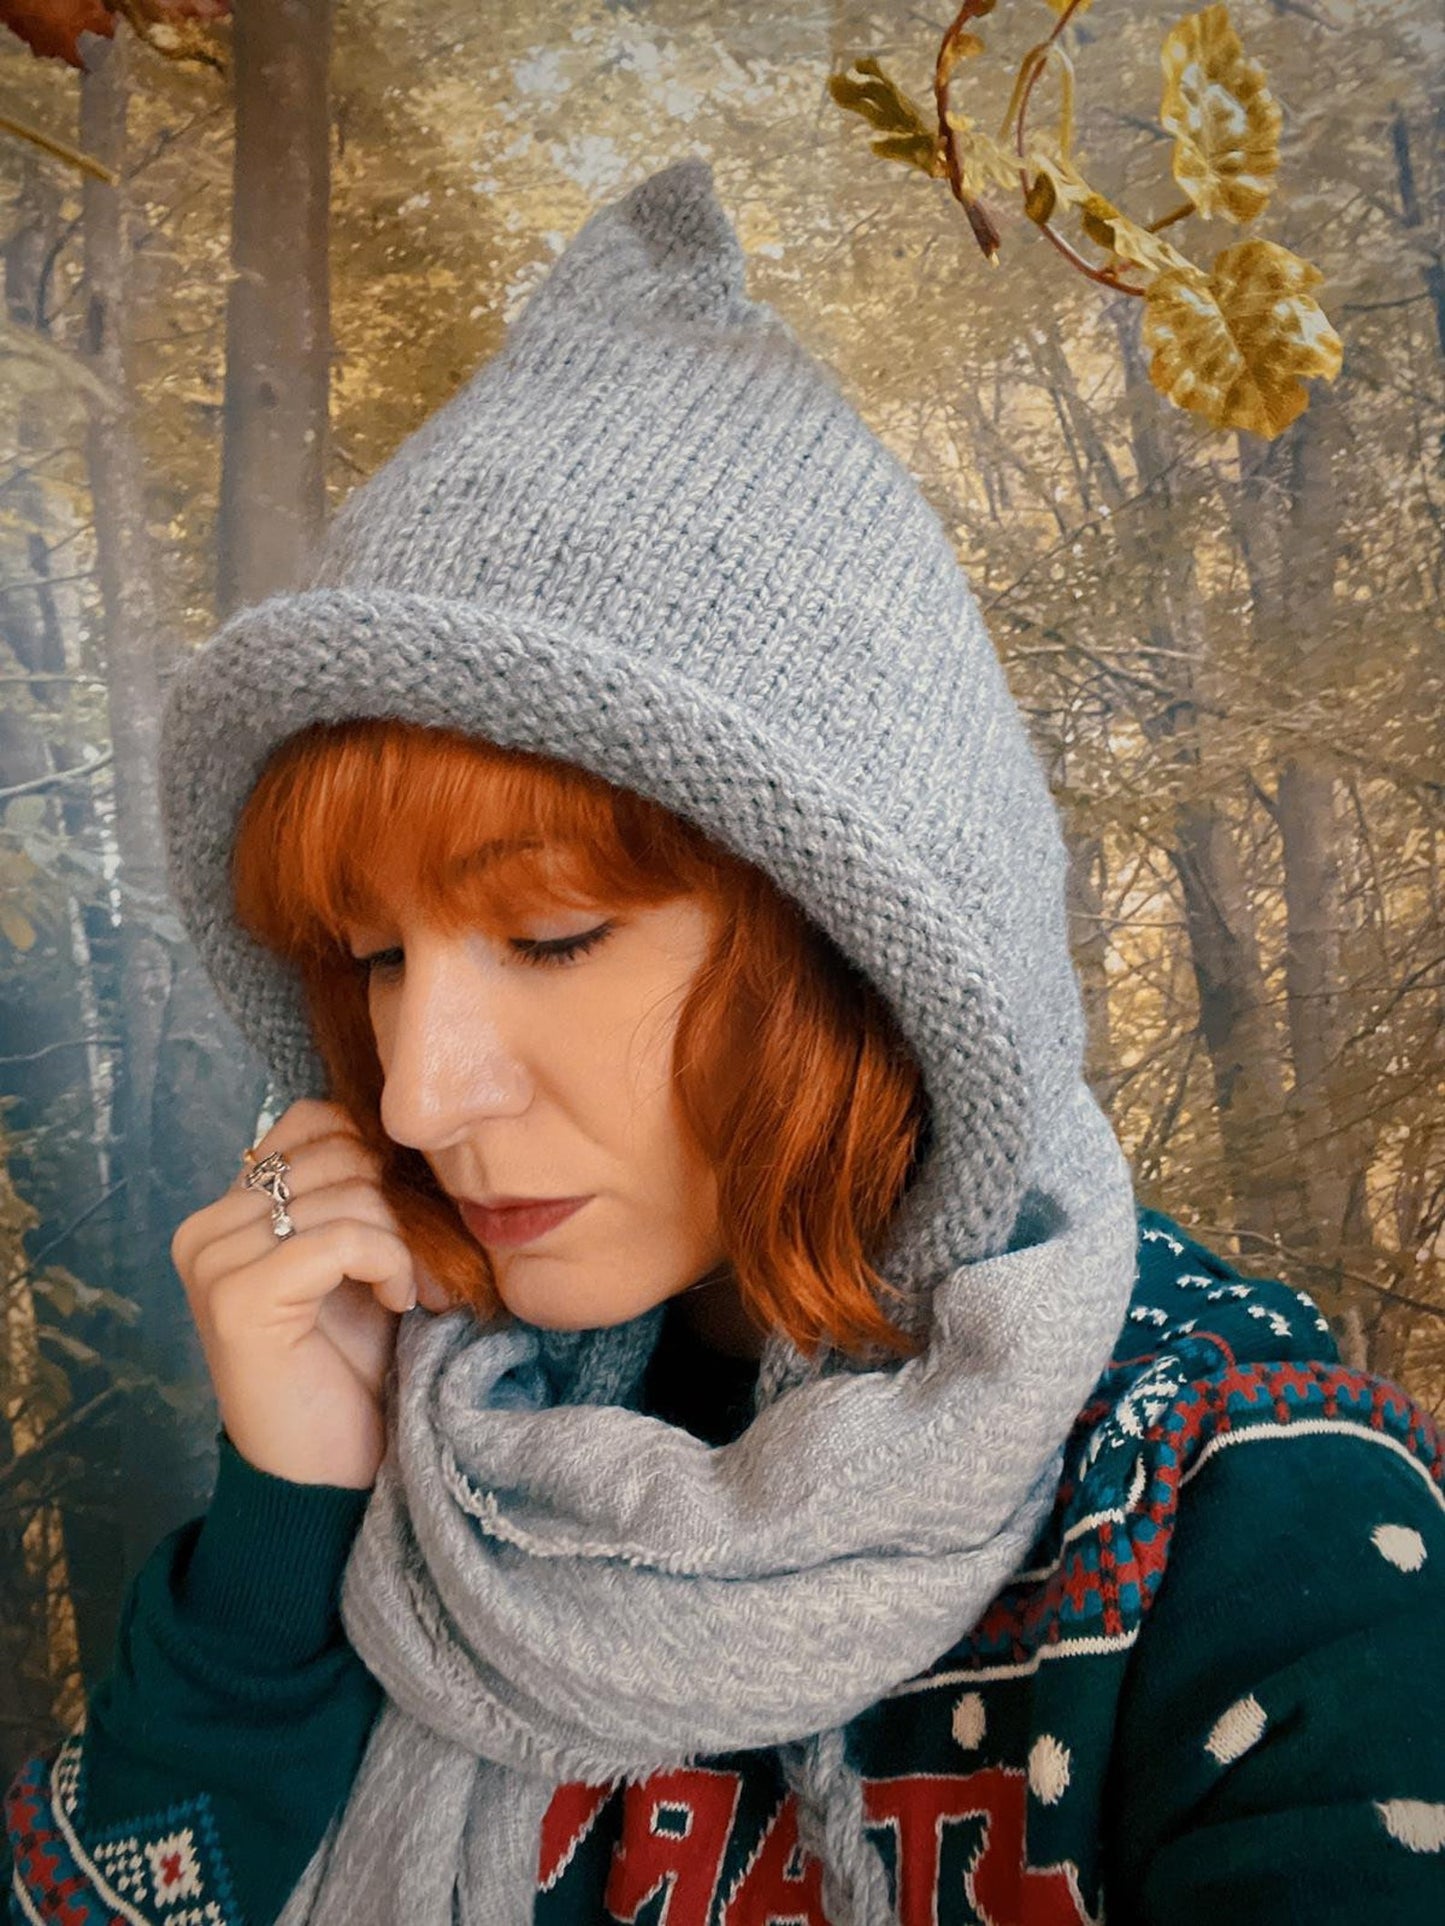 Pixie Hat hand made - Fairytale cottagecore medieval vegan wool